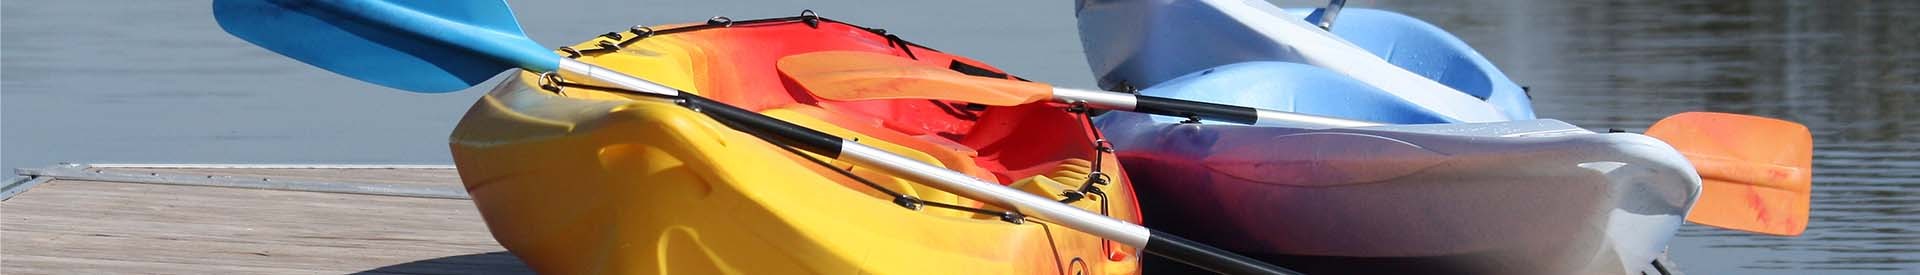 kayak-frossay-st-brevin-activites-nautiques-258